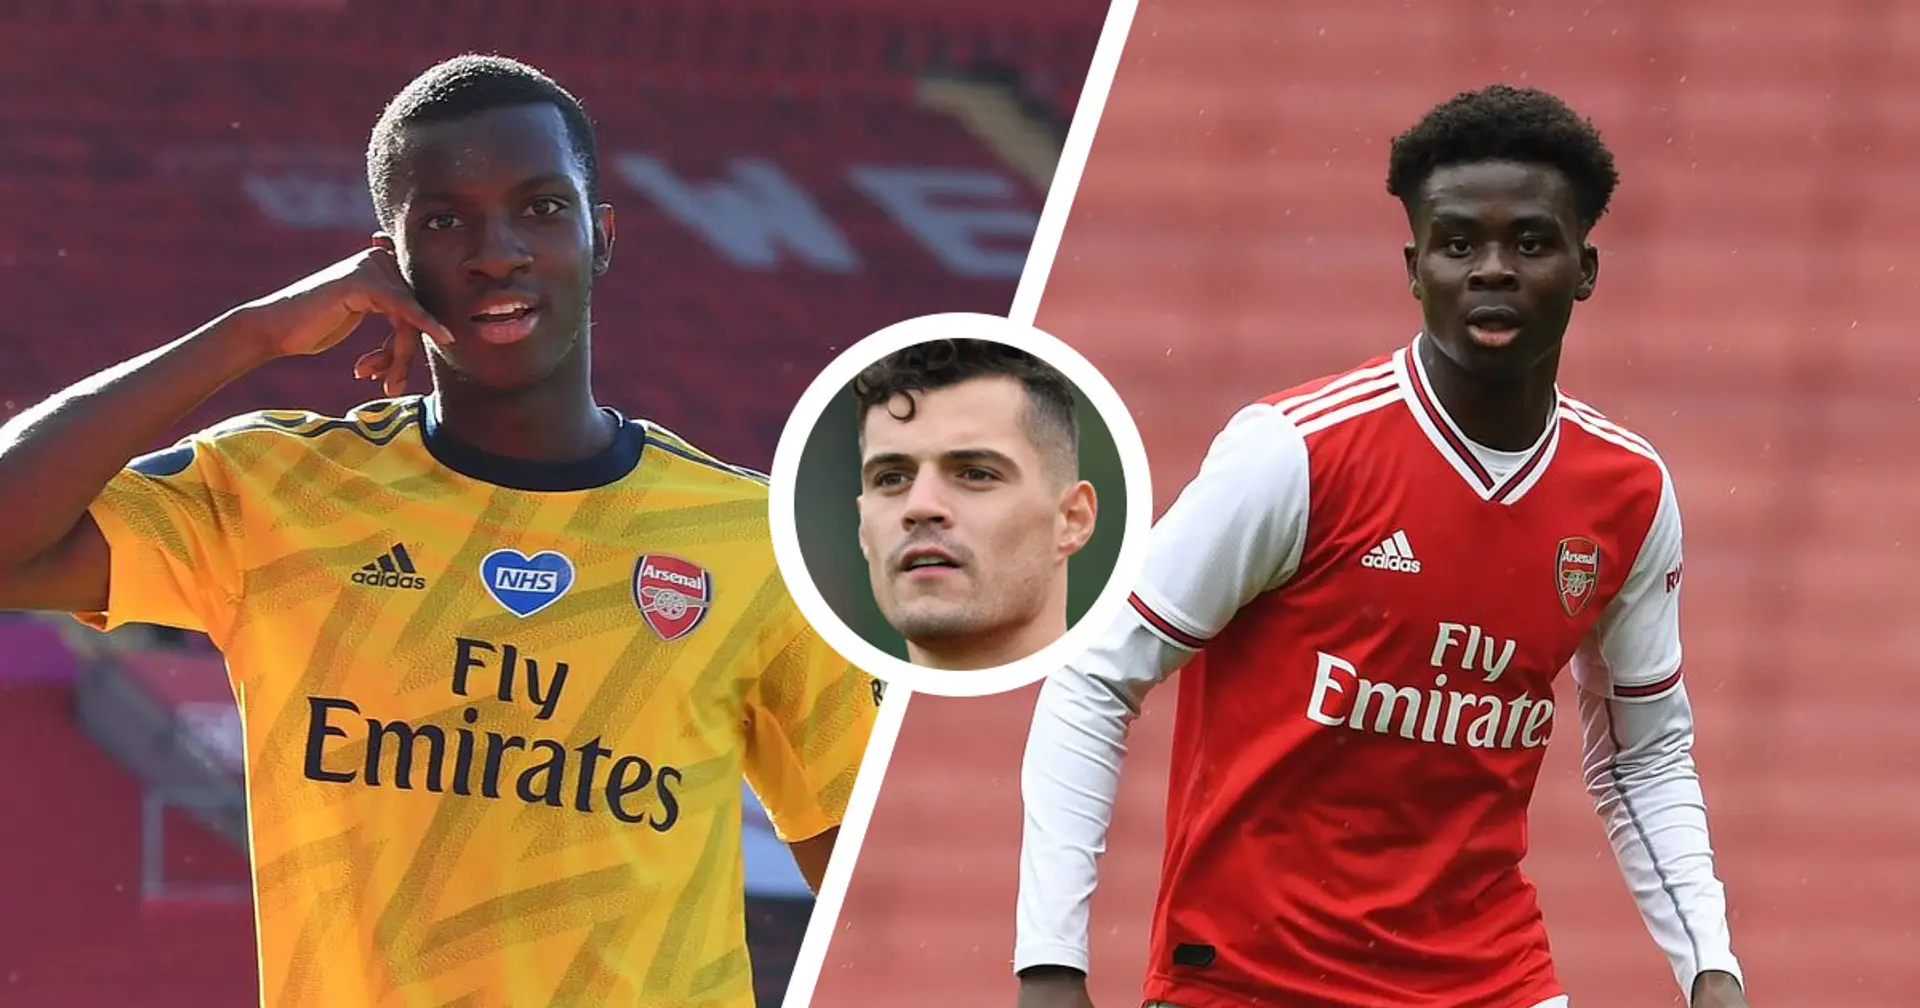 'They have big futures': Xhaka lavishes praise on Arsenal youngsters as he assesses So'ton win